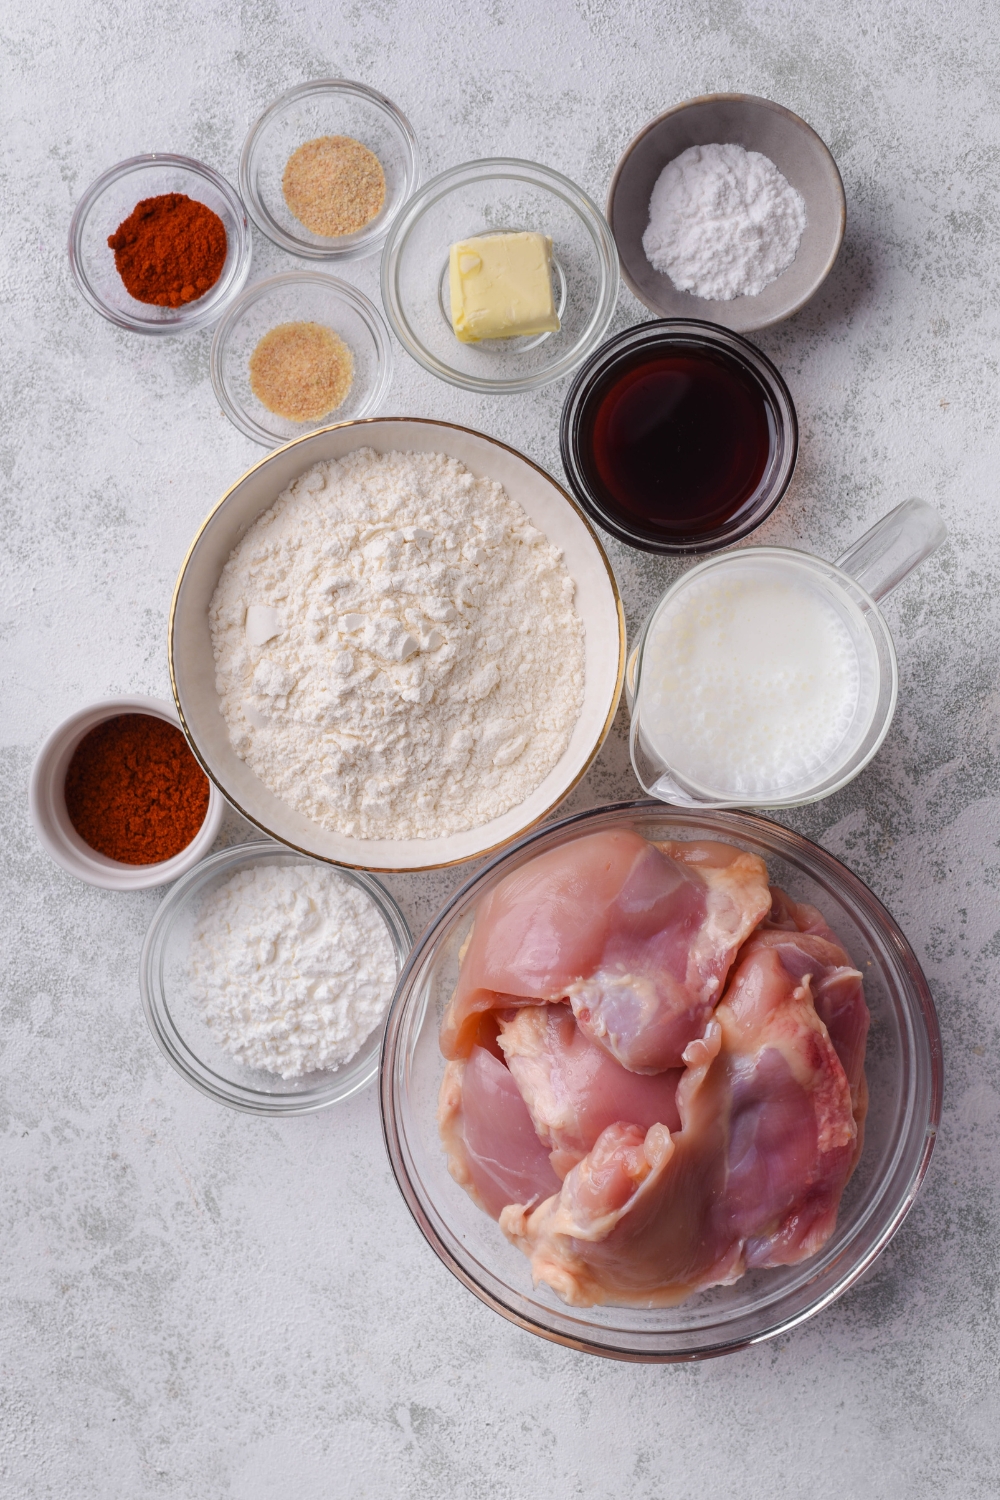 Overhead view of an assortment of ingredients including bowls of raw chicken, flour, chili powder, butter, buttermilk, and seasonings.